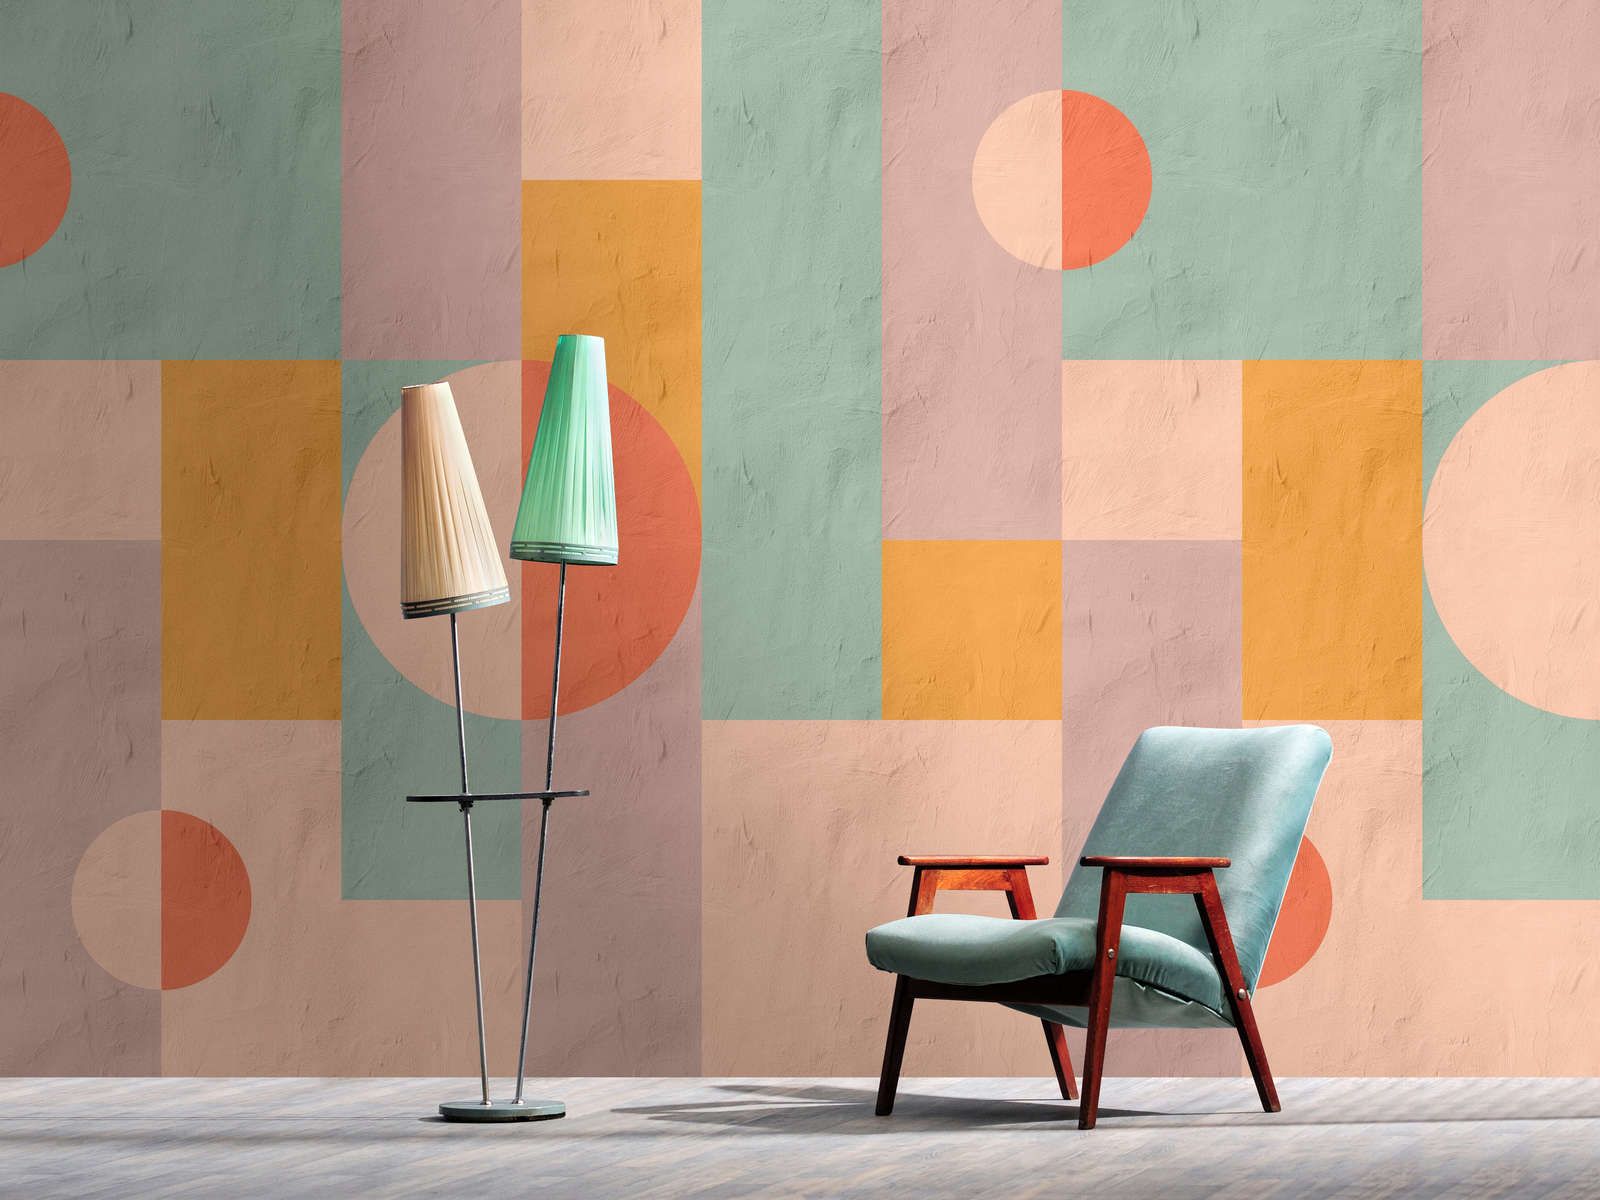             Photo wallpaper »estrella 2« - Graphic pattern in clay plaster look - red, orange, mint | Smooth, slightly pearlescent non-woven fabric
        